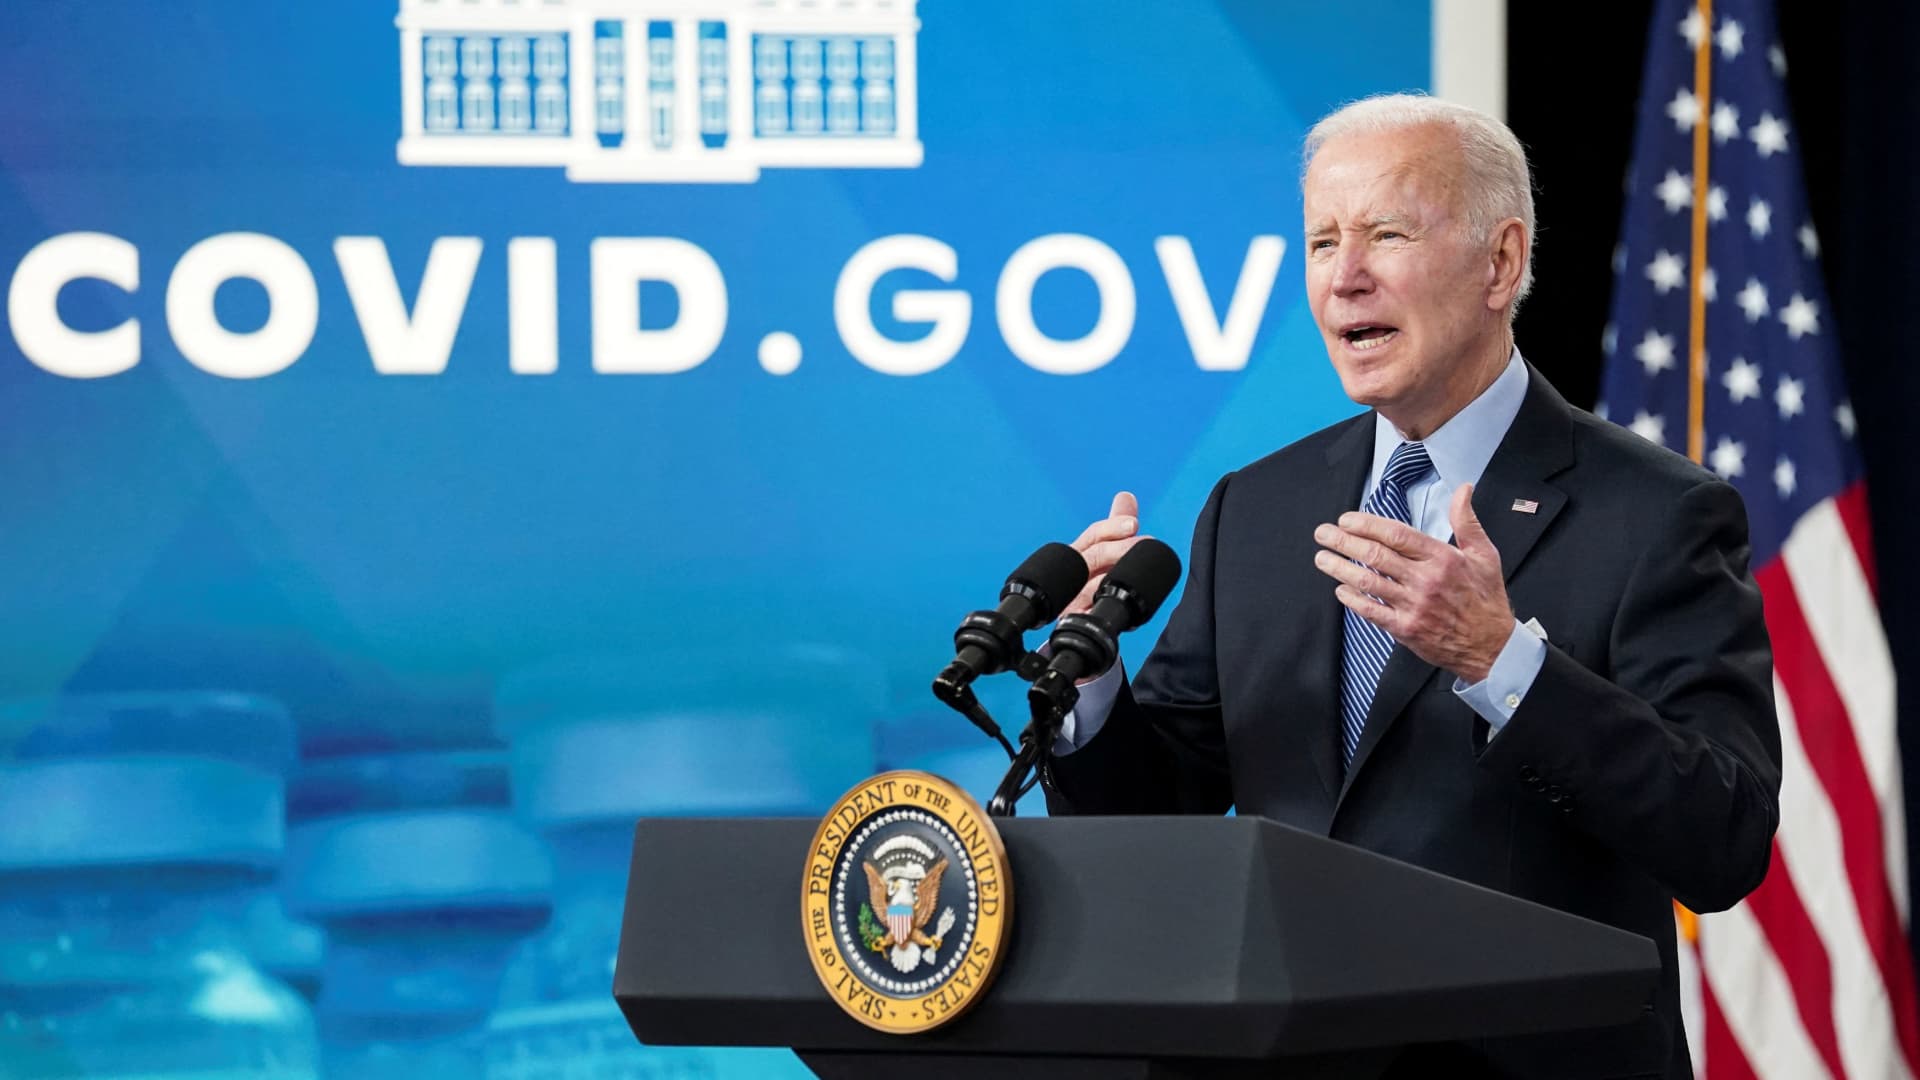 Biden plans to end public health emergency on May 11